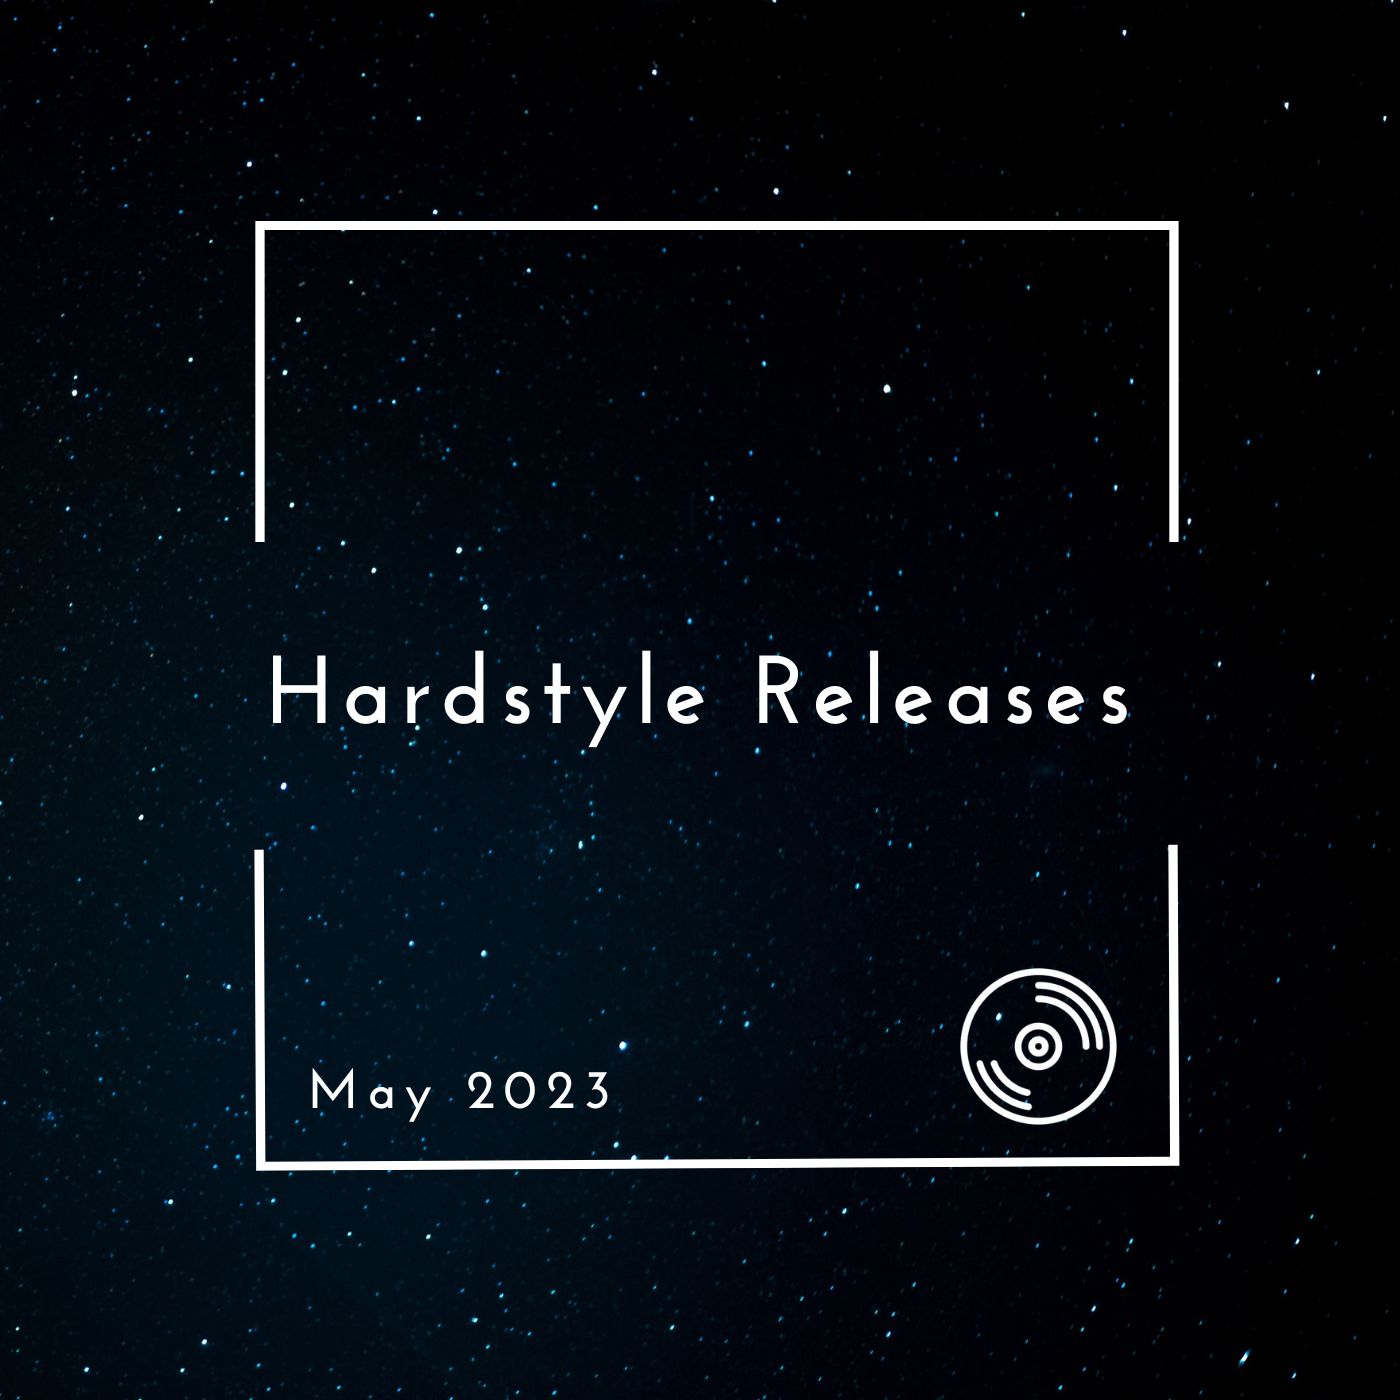 Hardstyle Releases May 2023